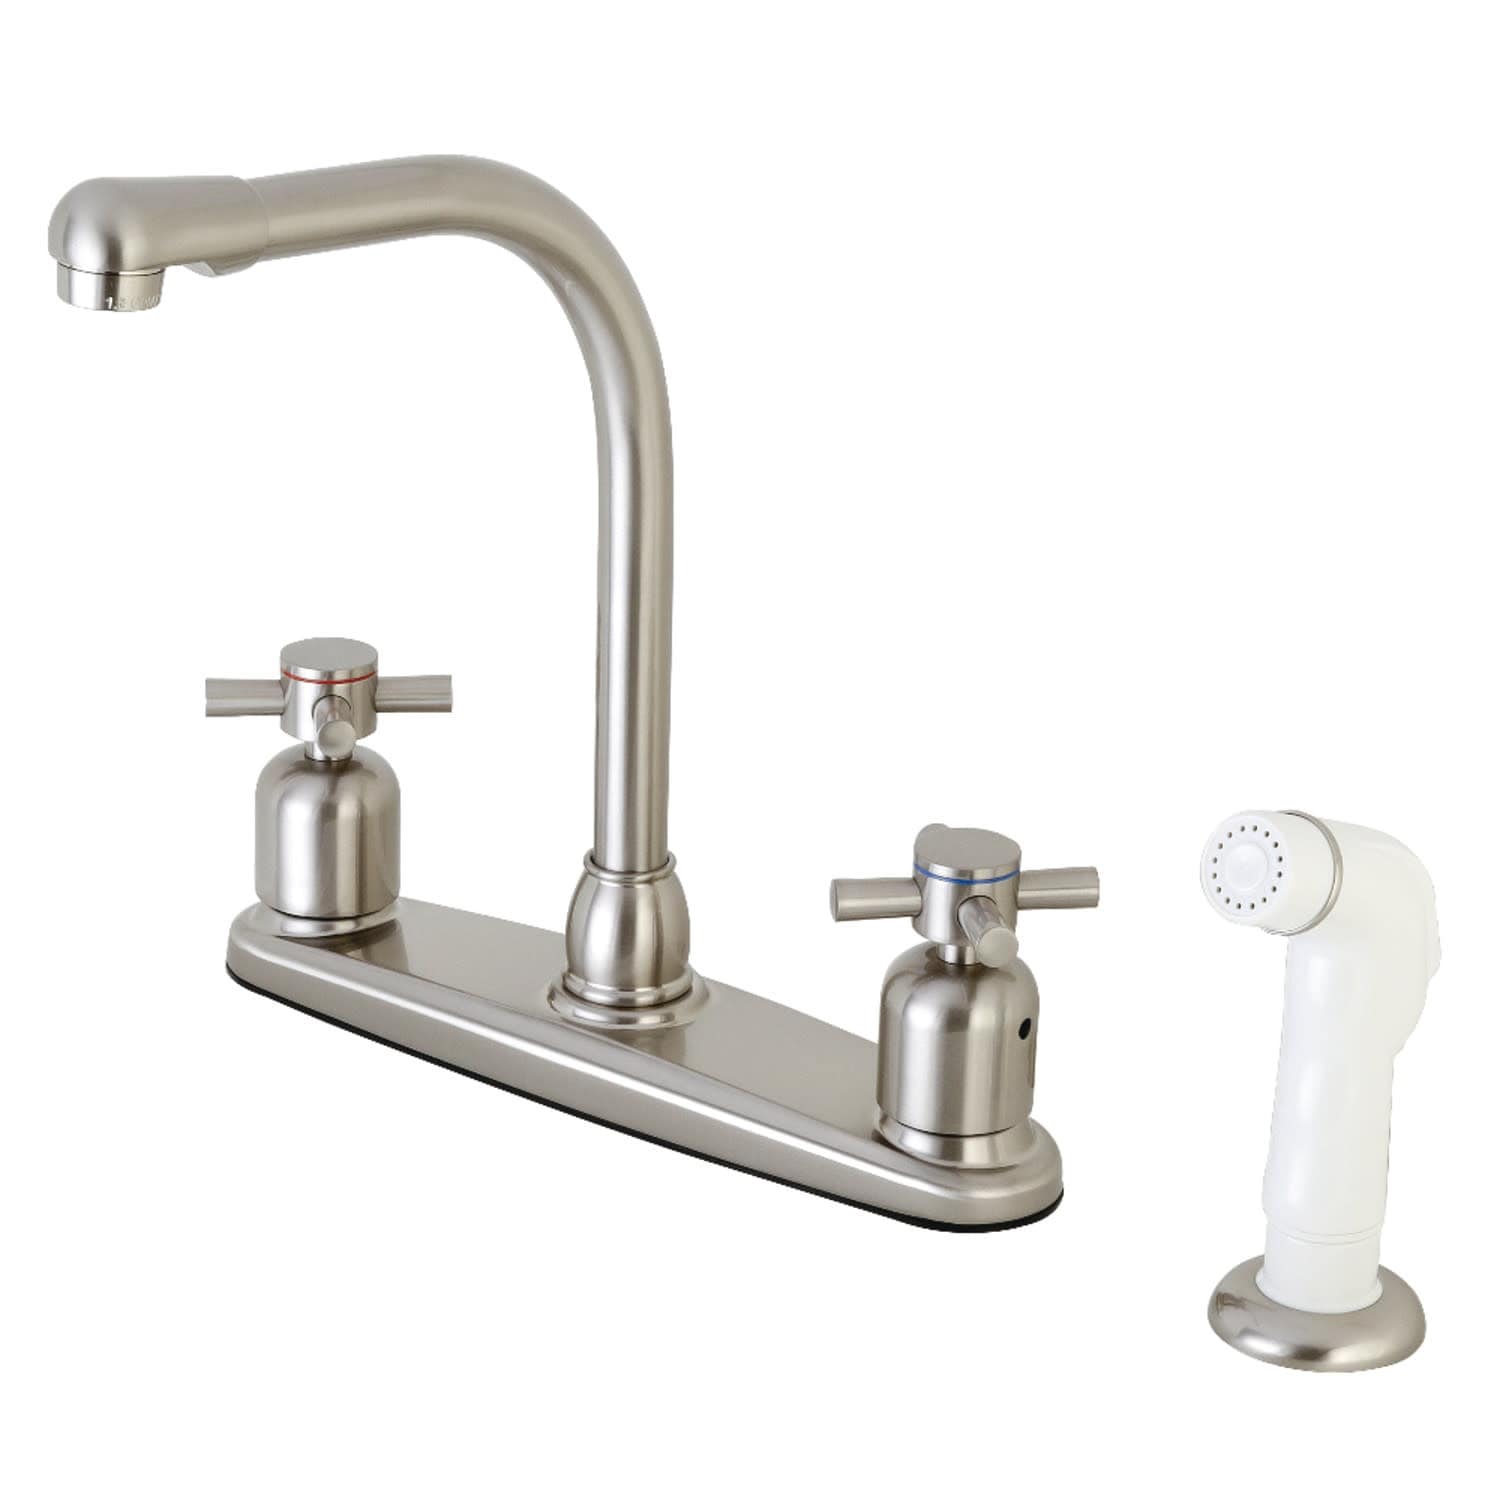 Kingston Brass Concord 1.8 GPM Standard Kitchen Faucet - Includes Side